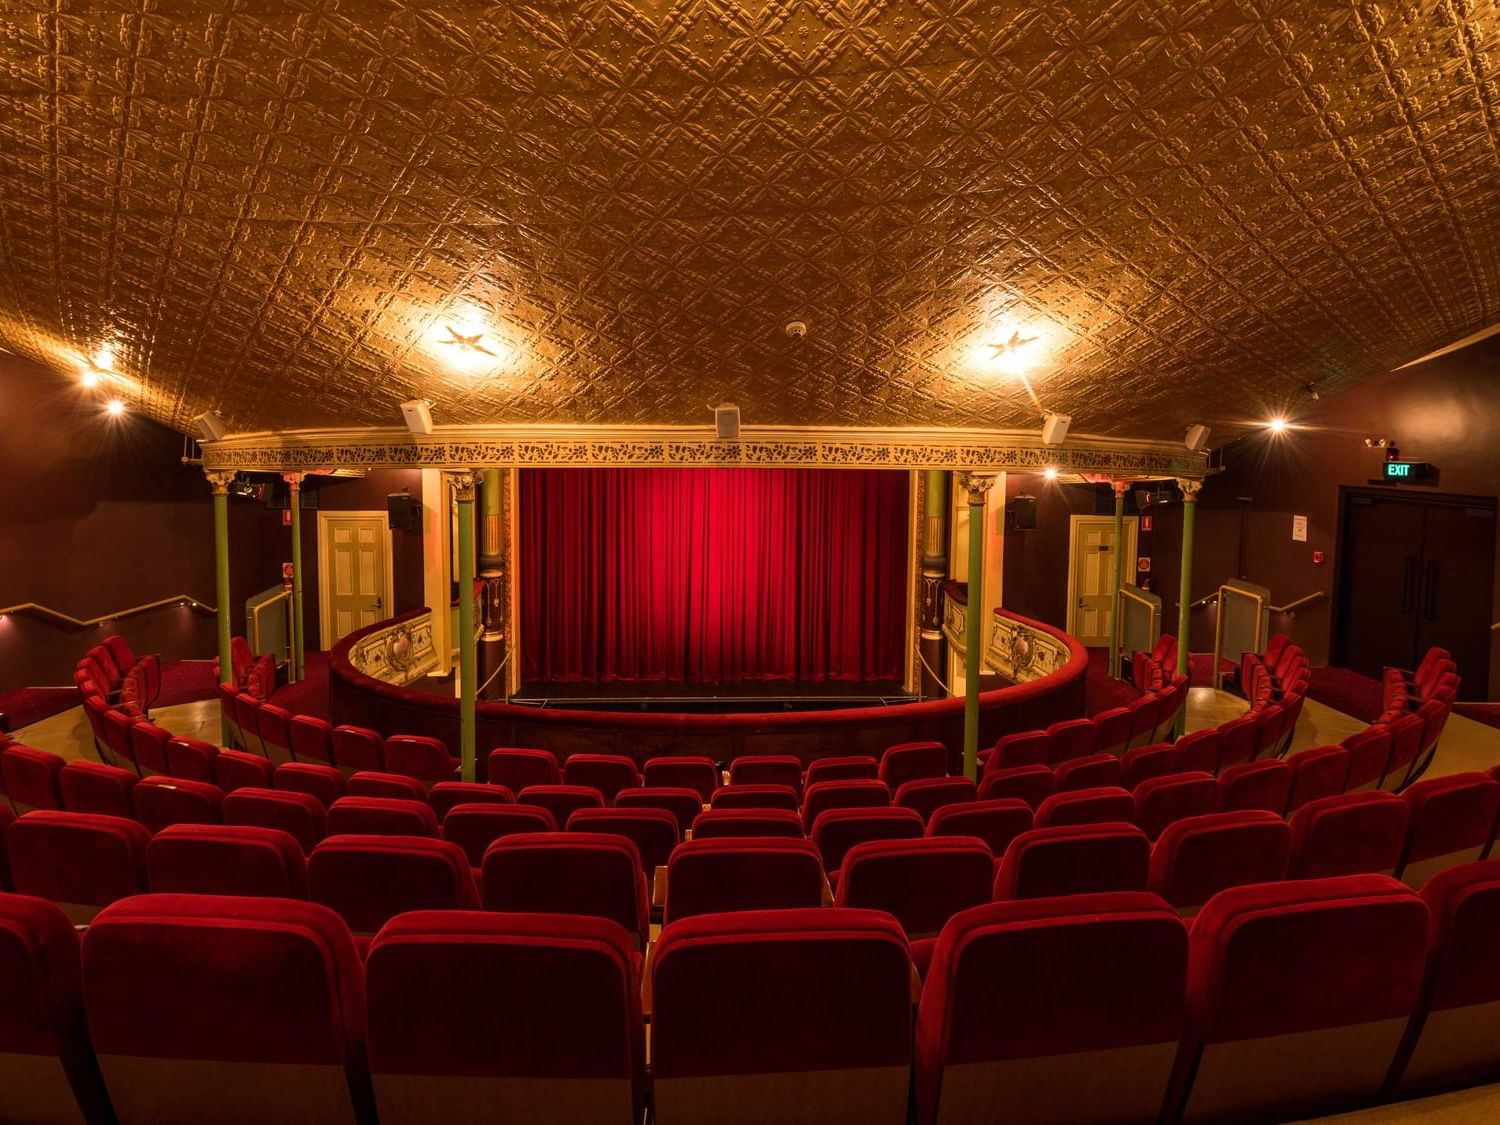 Theatre Royale hall with red seats near Hotel Grand Chancellor Hobart